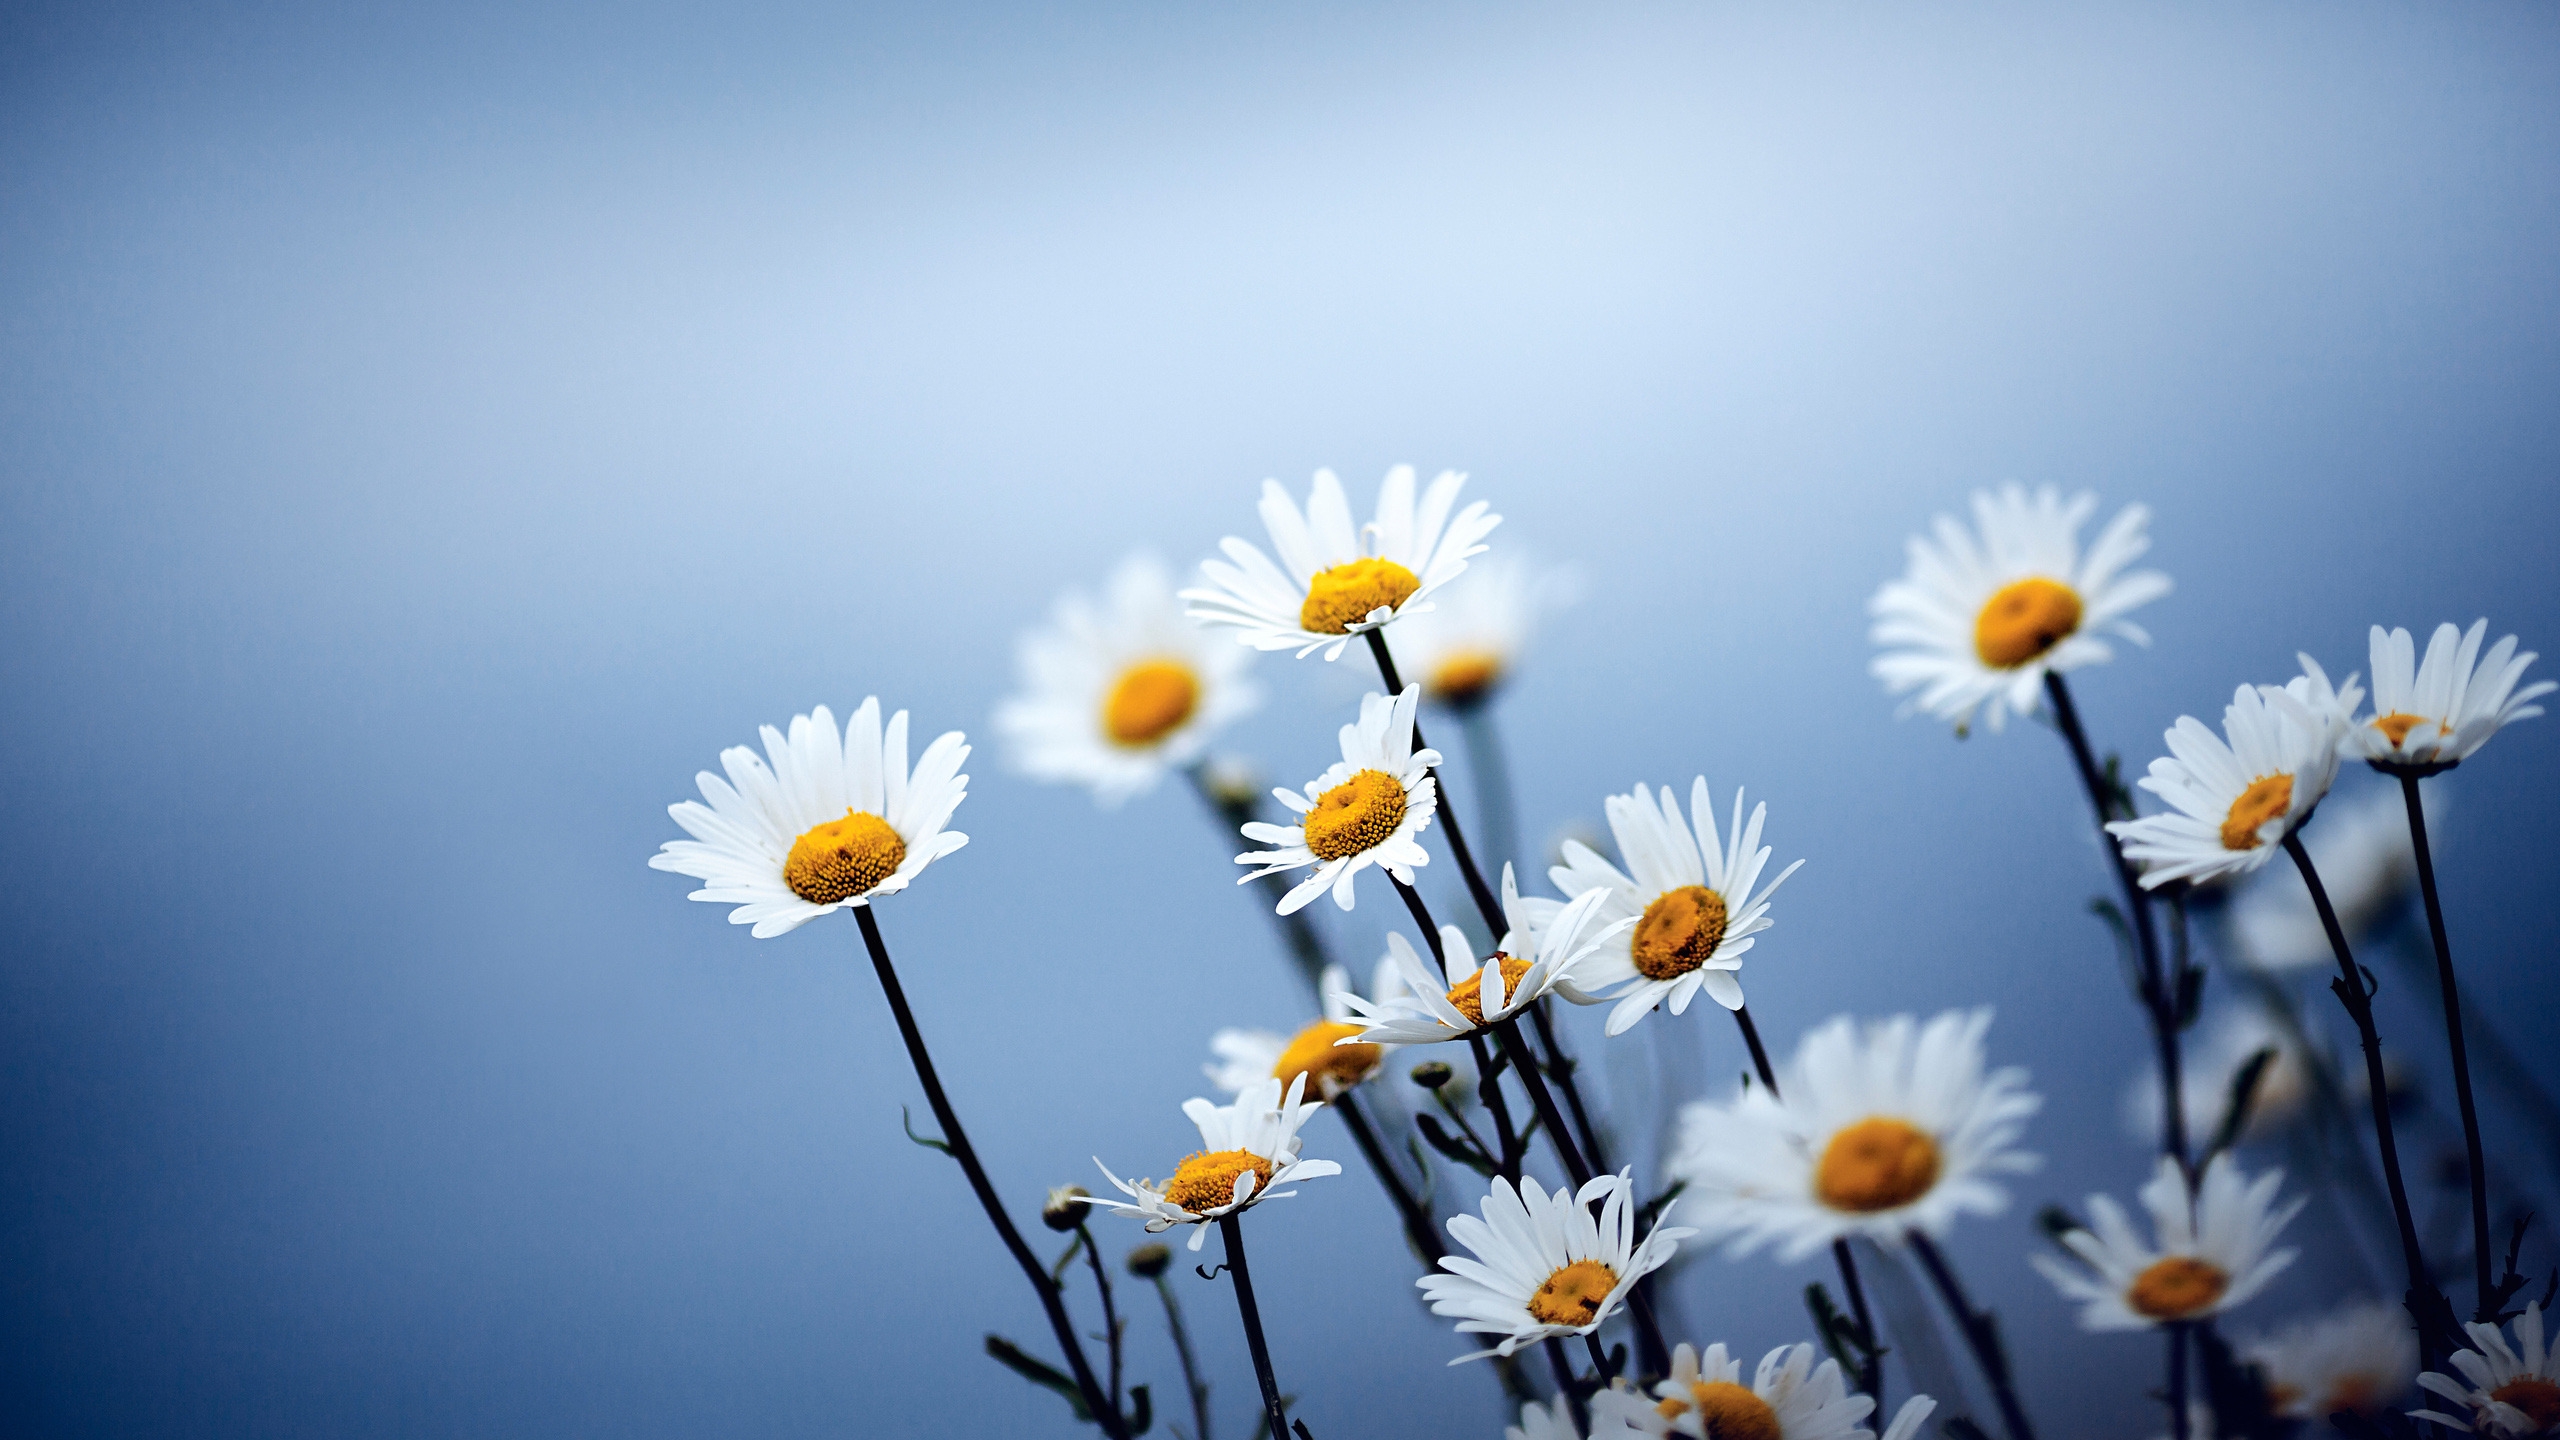 Cute Daises Flowers for 2560x1440 HDTV resolution